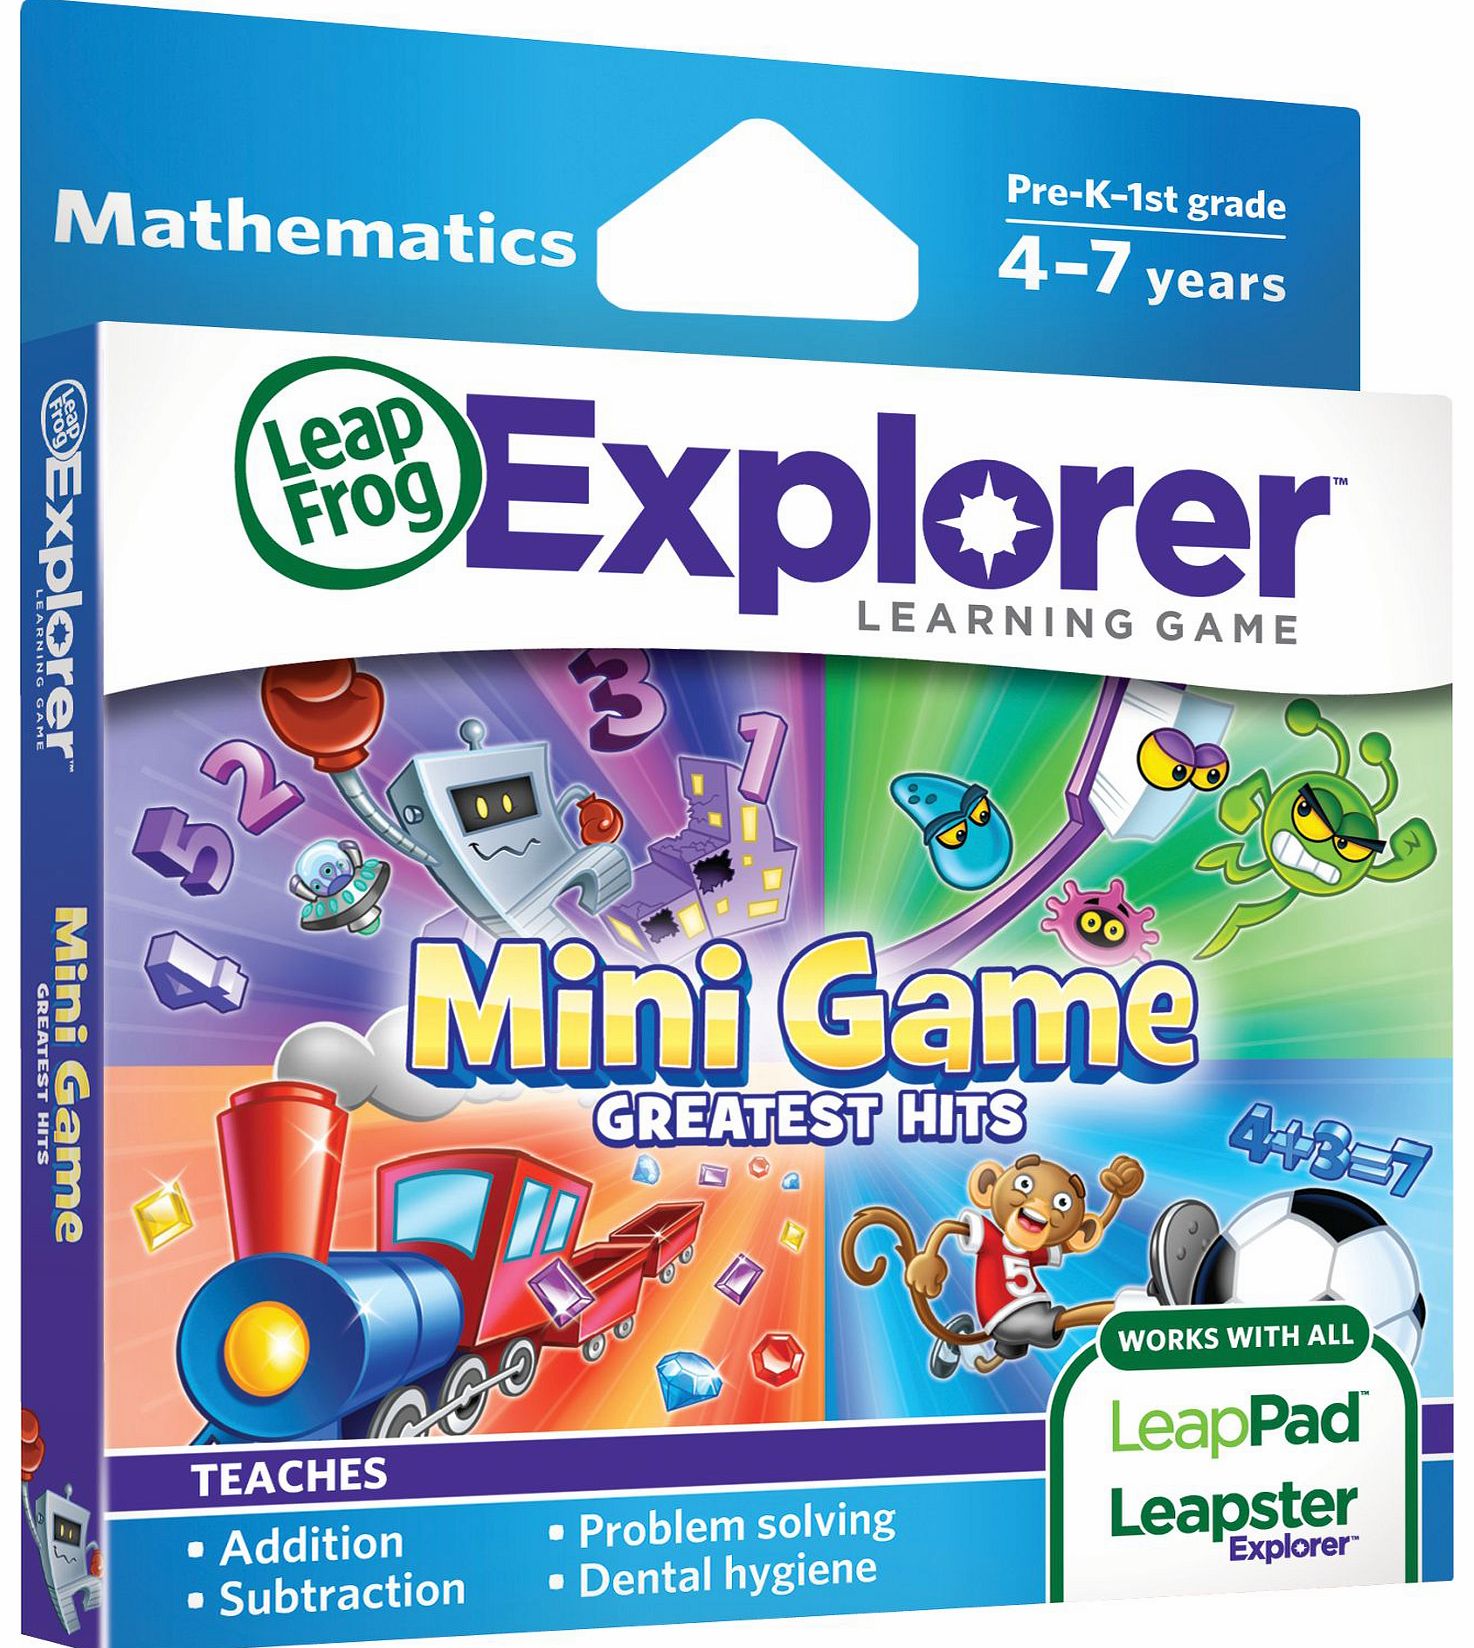 Explorer Learning Game - Mini Game Greatest Hits